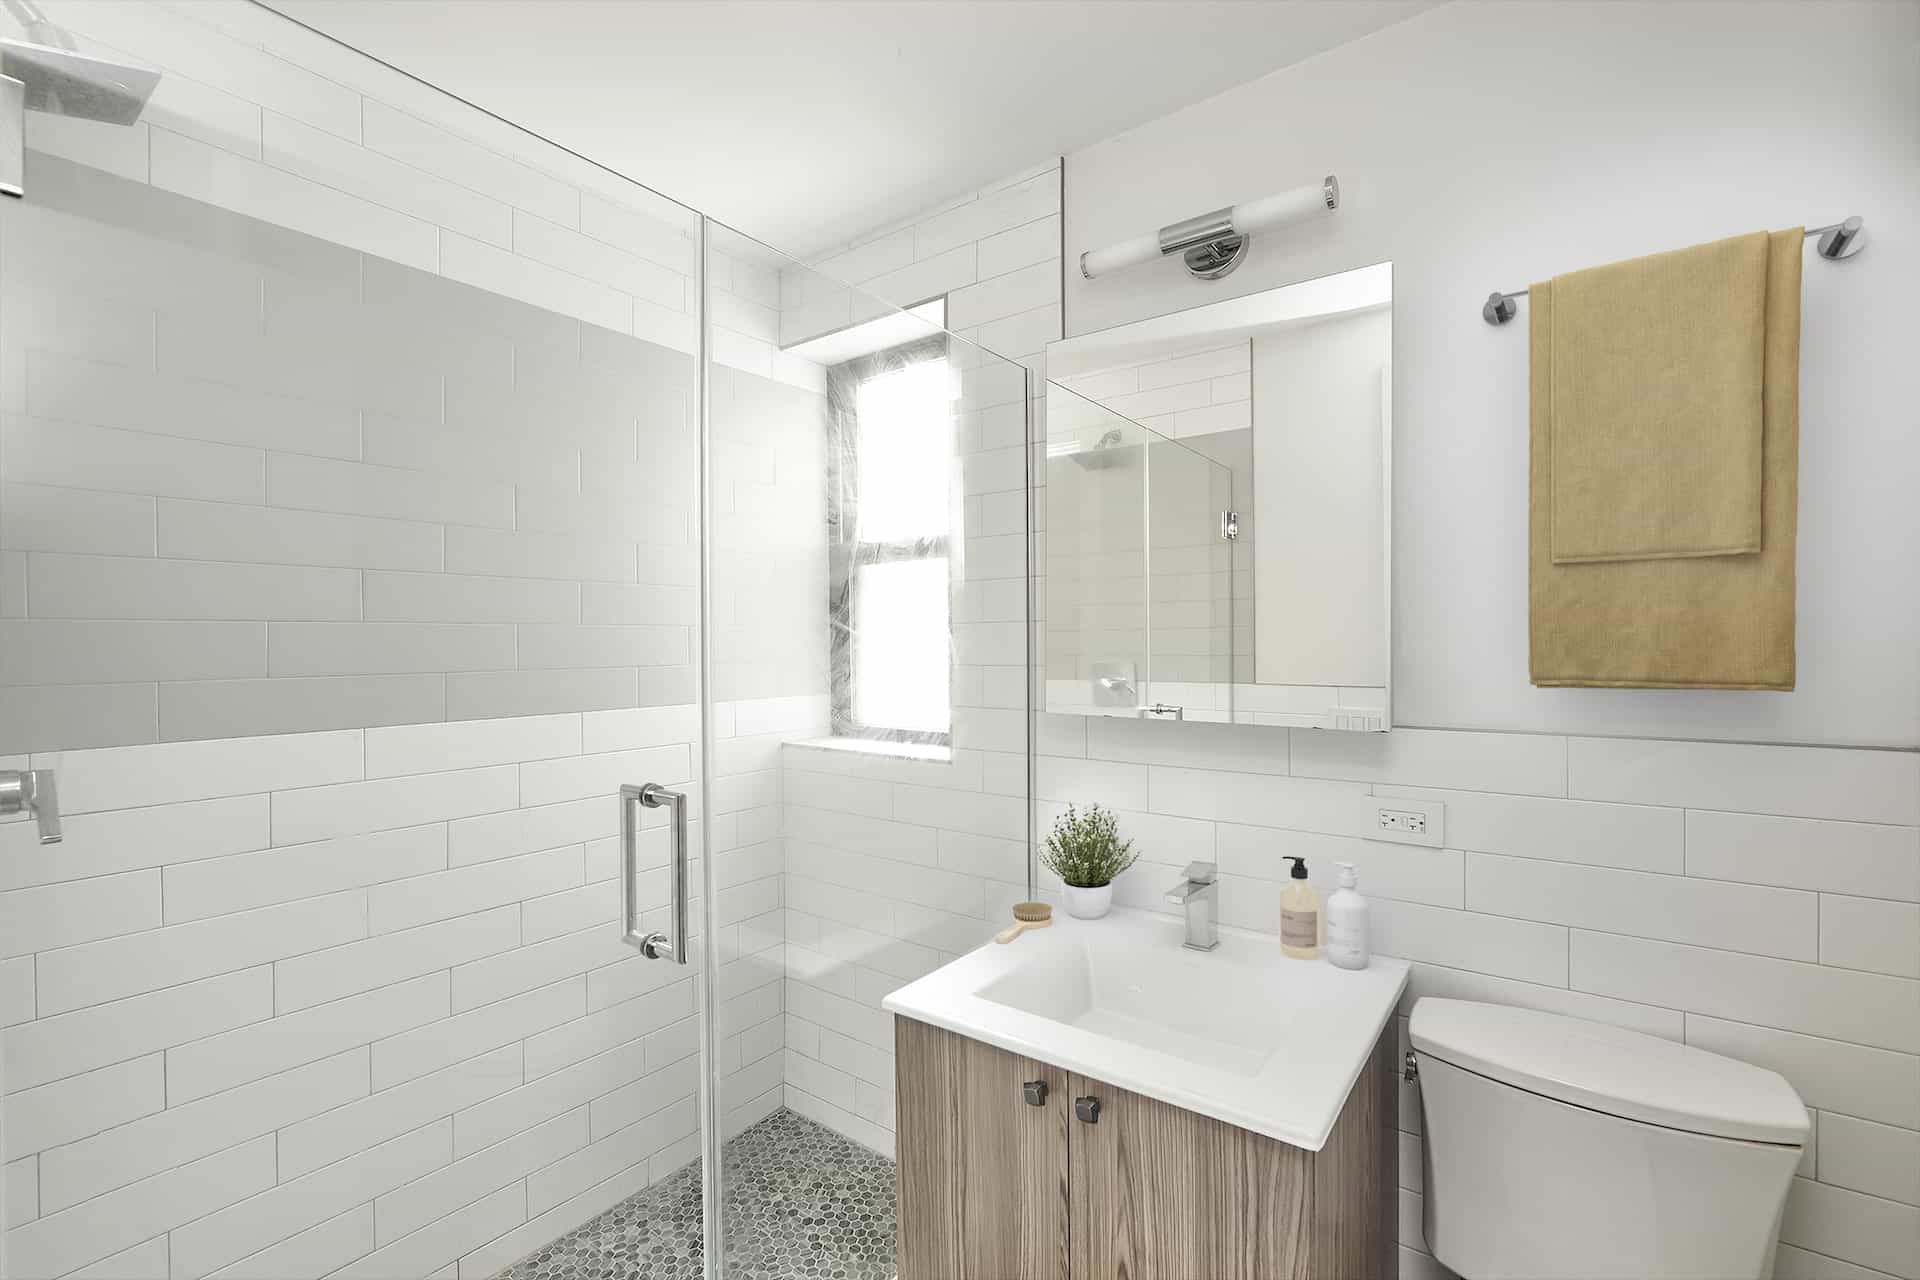 Bathroom at 244 East 46th Street apartments in Turtle Bay with a single vanity, square mirror & walk-in shower with a window.